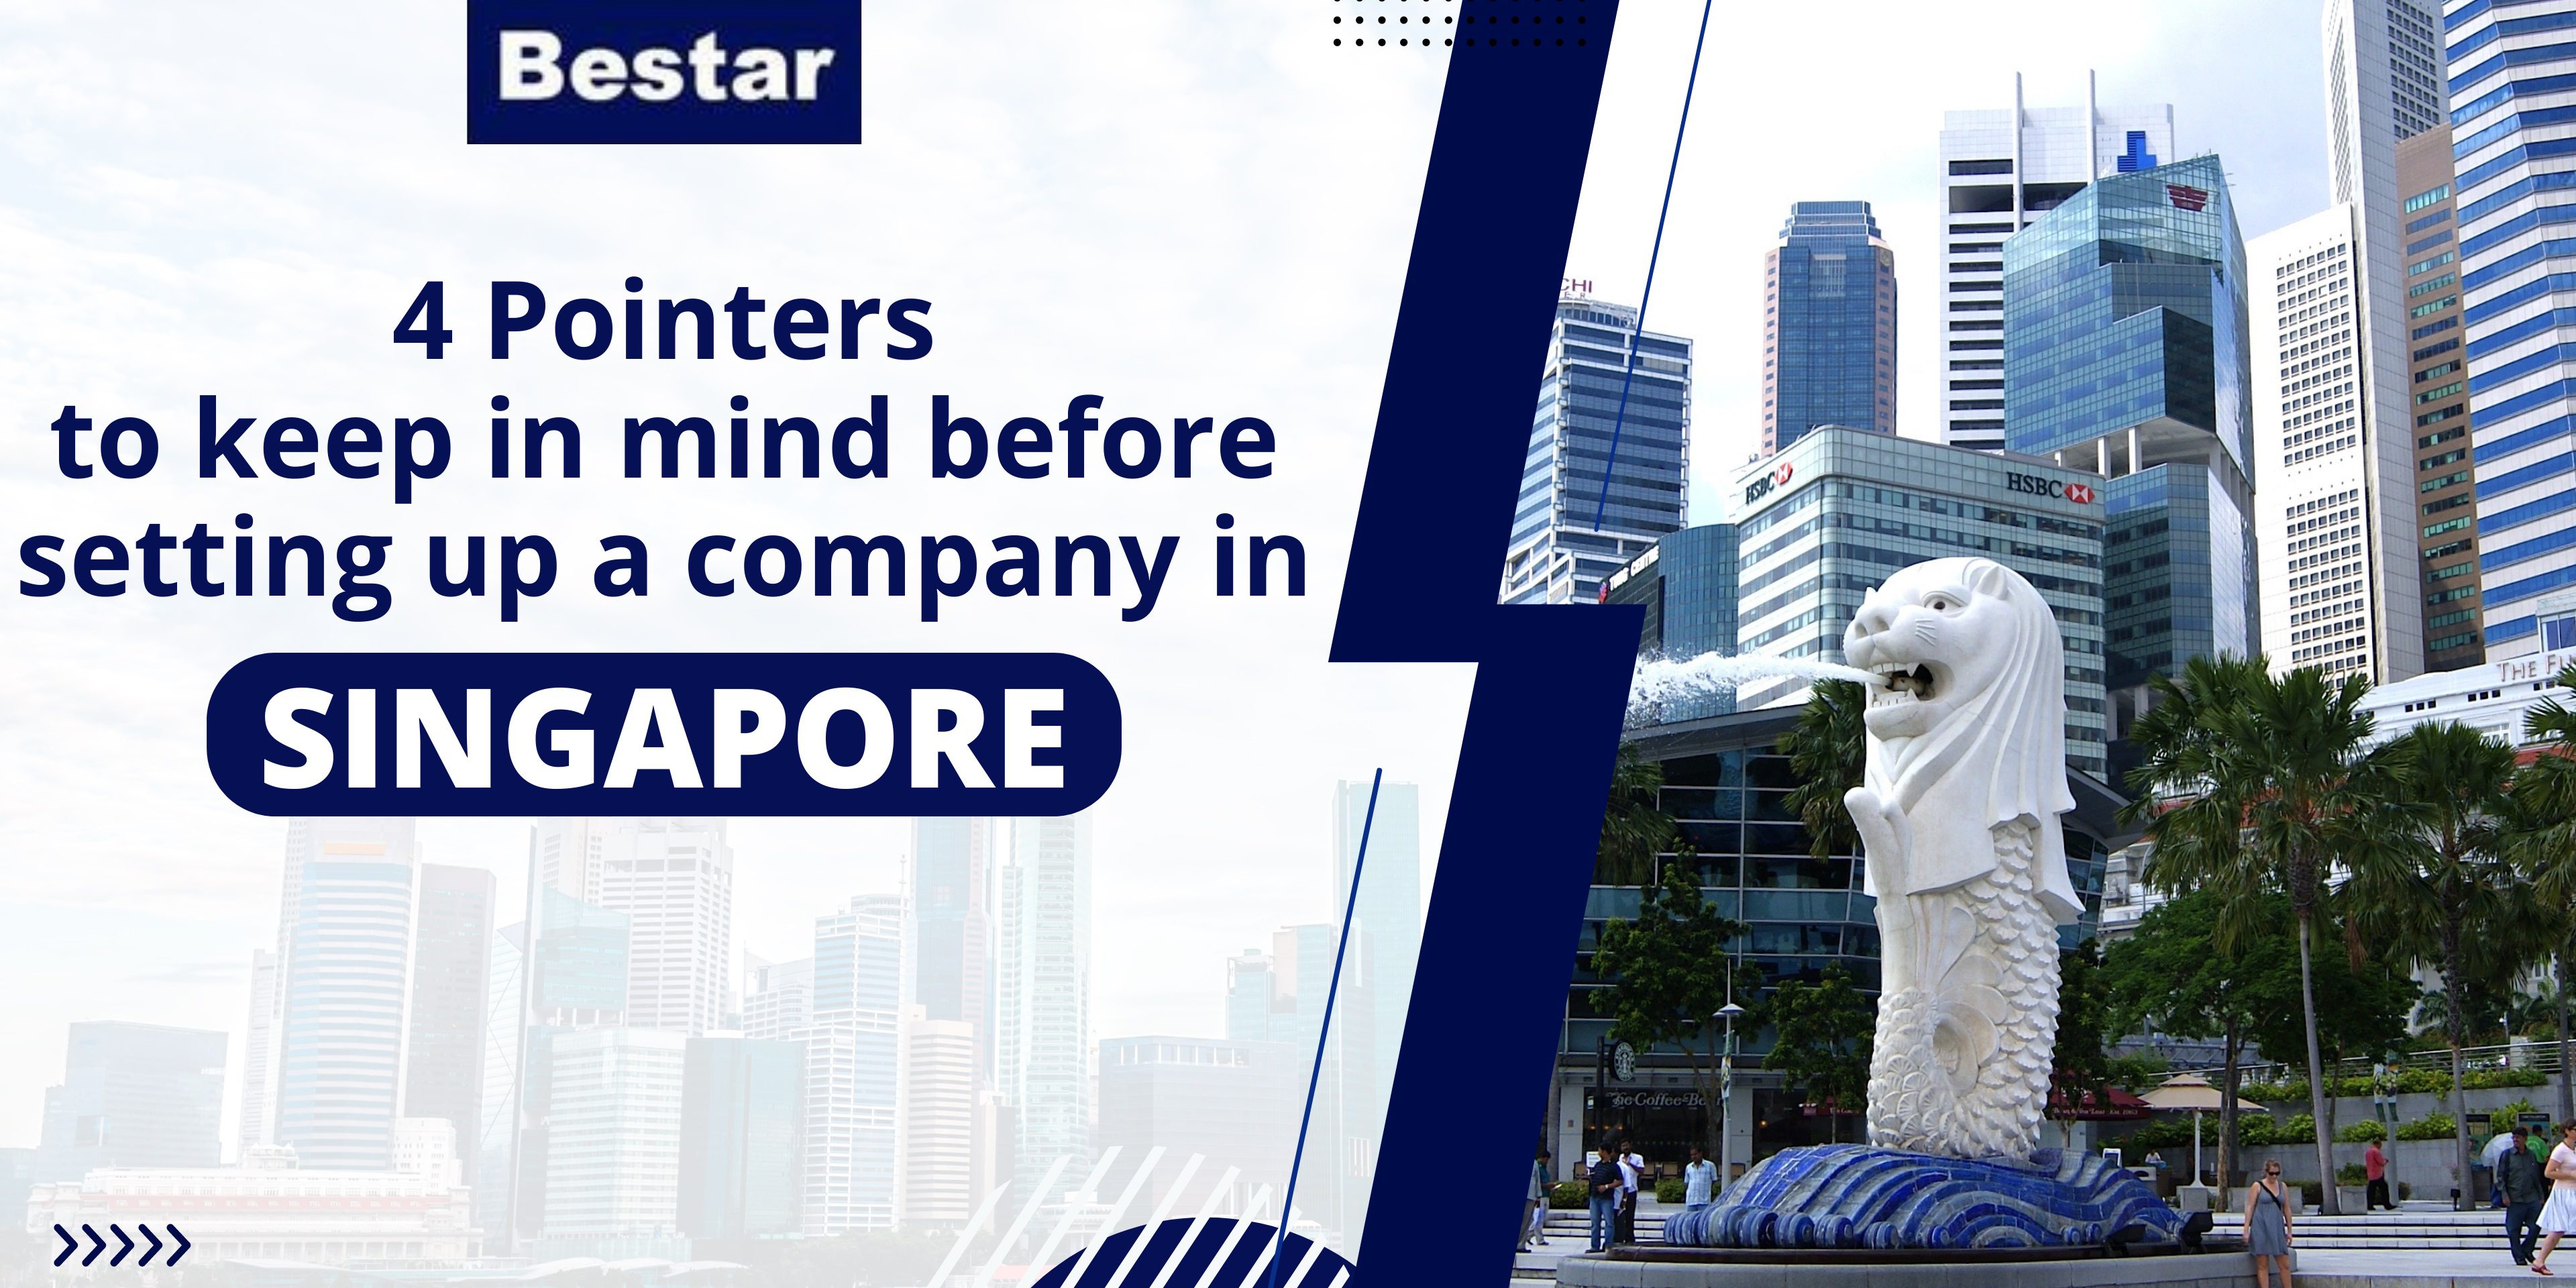 4 Pointers to keep in mind before setting up a company in Singapore